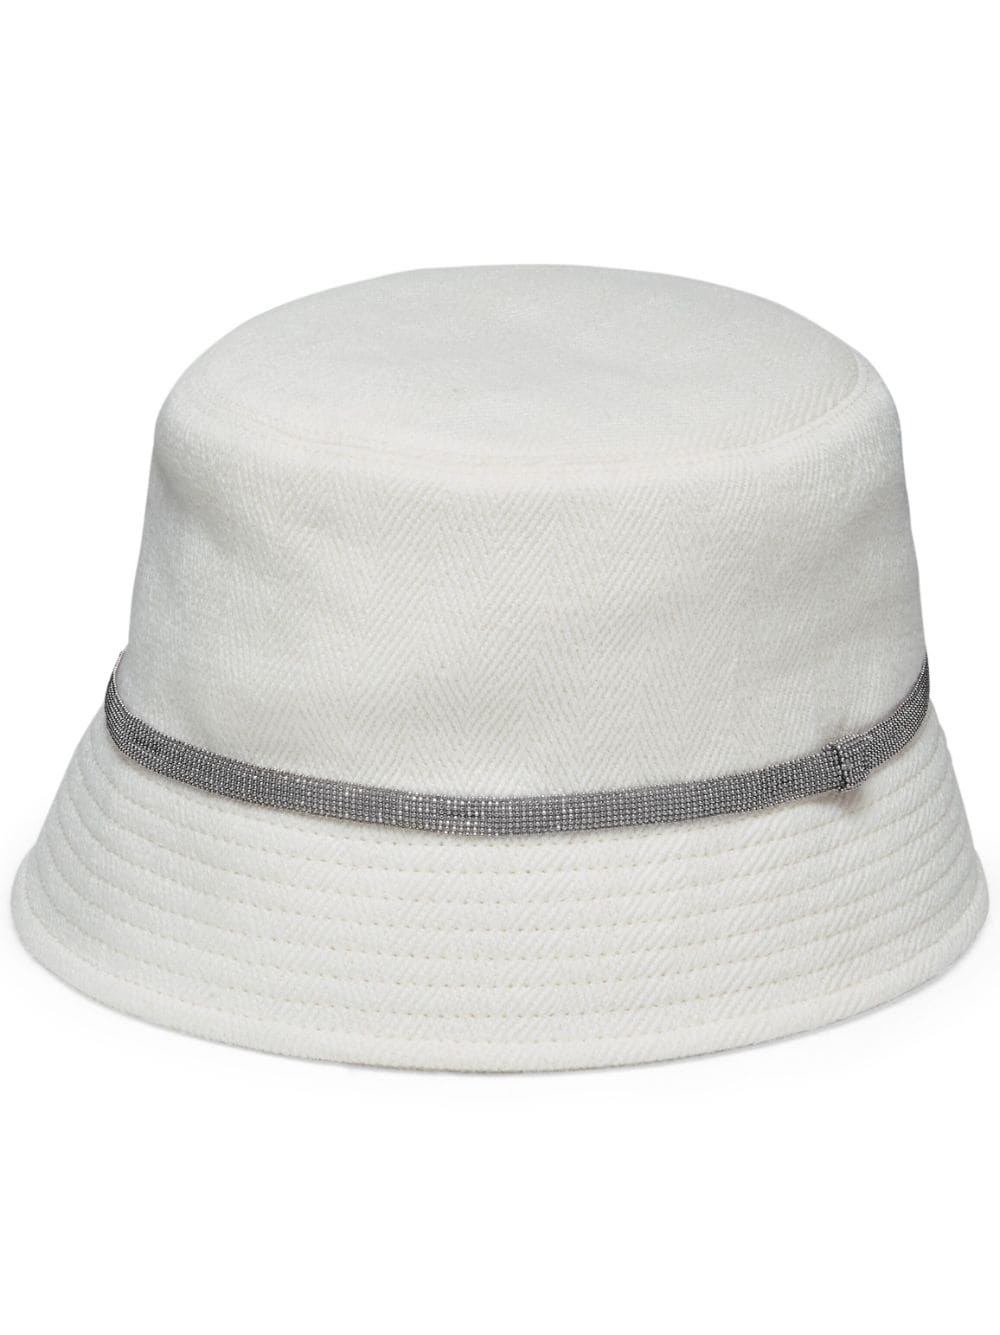 Linen and cotton bucket hat with shiny details - 1